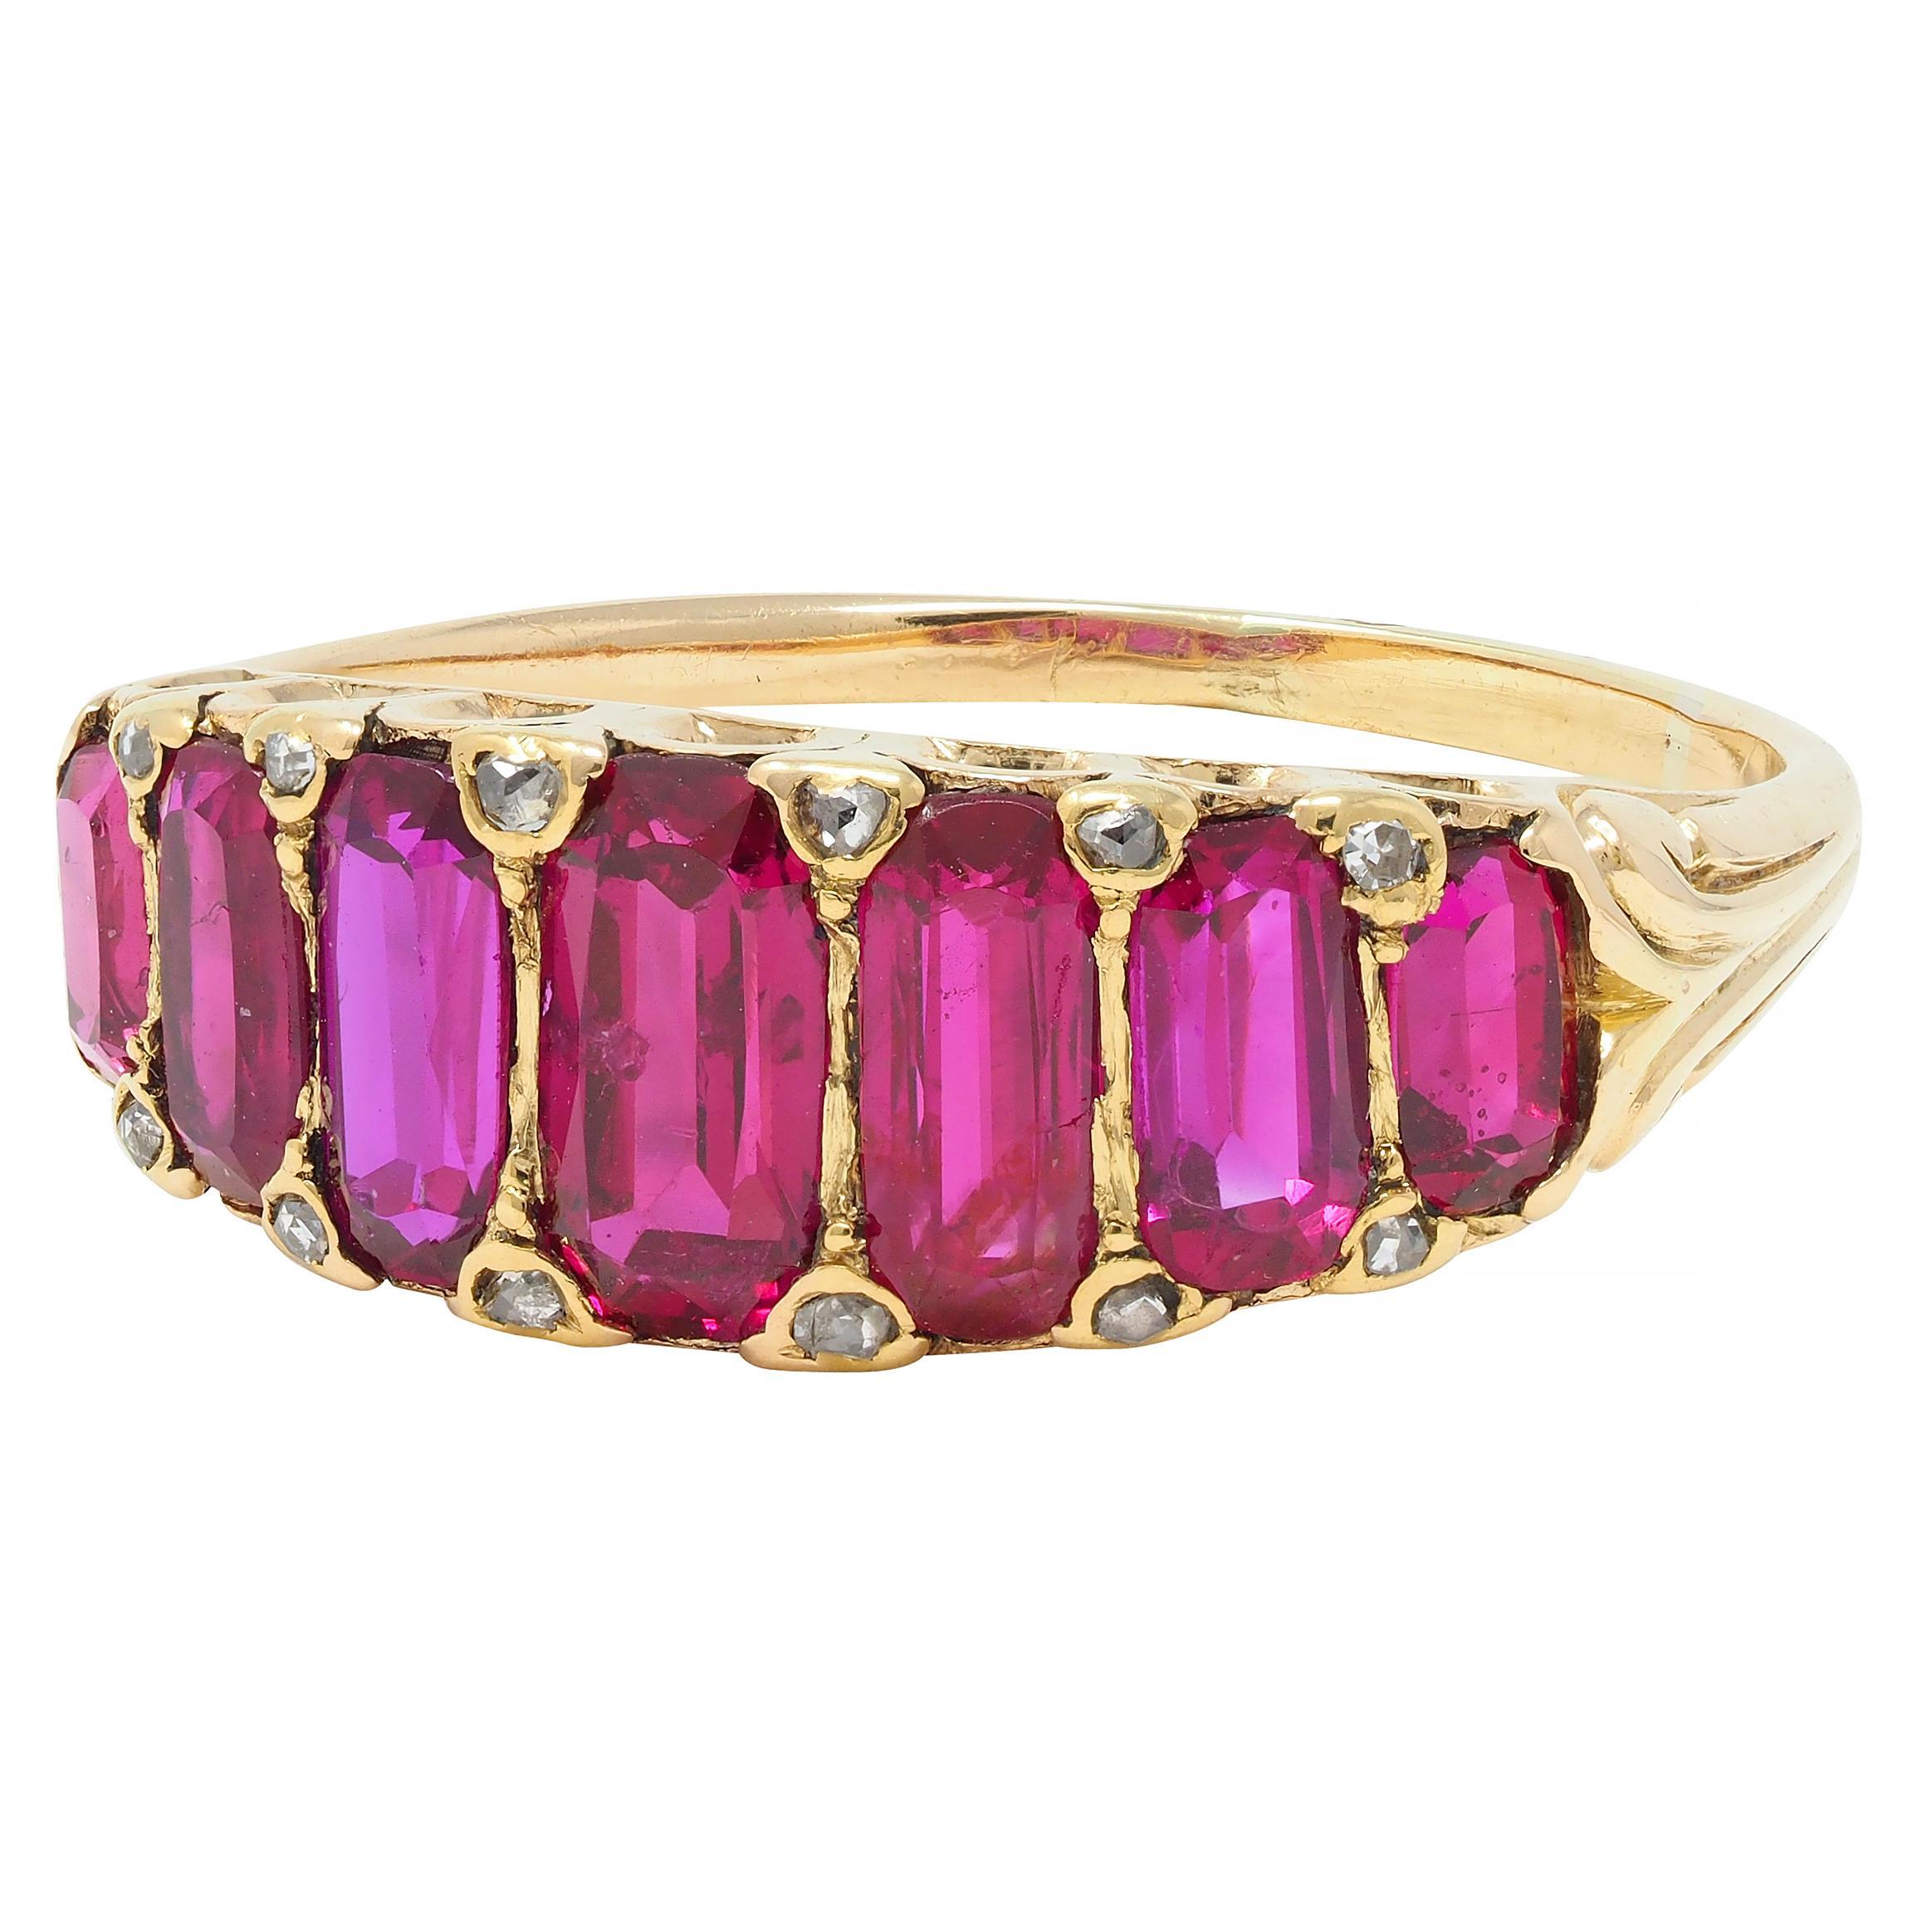 Featuring seven graduated cushion-shaped step cut rubies flush set east to west
Weighing approximately 2.80 carats total - transparent purplish red in color
Natural Burmese in origin with no indications of heat treatment 
Accented by rose cut